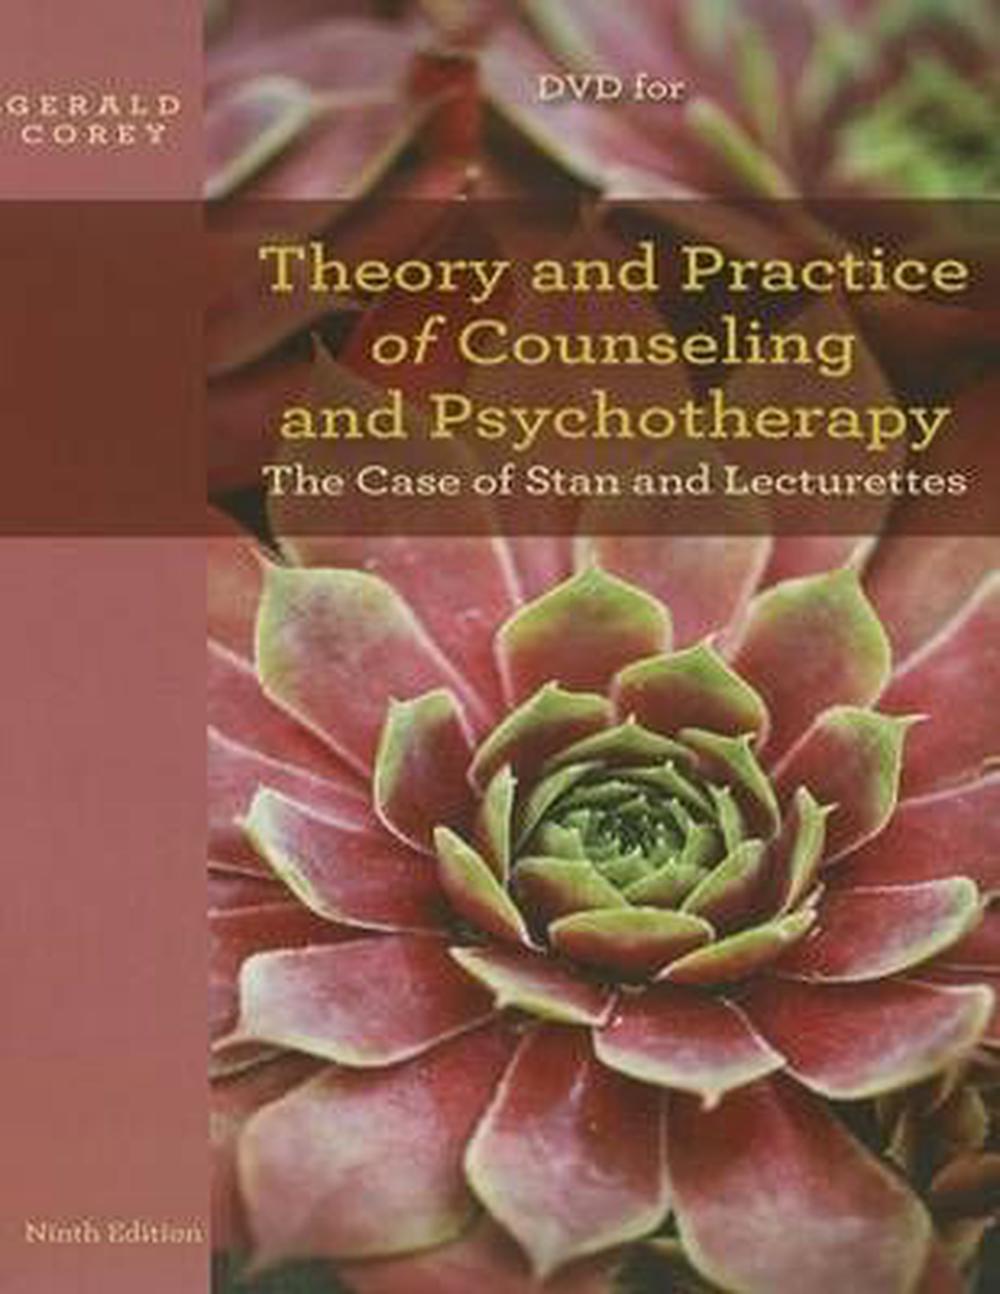 DVD The Case of Stan and Lecturettes for Theory and Practice of